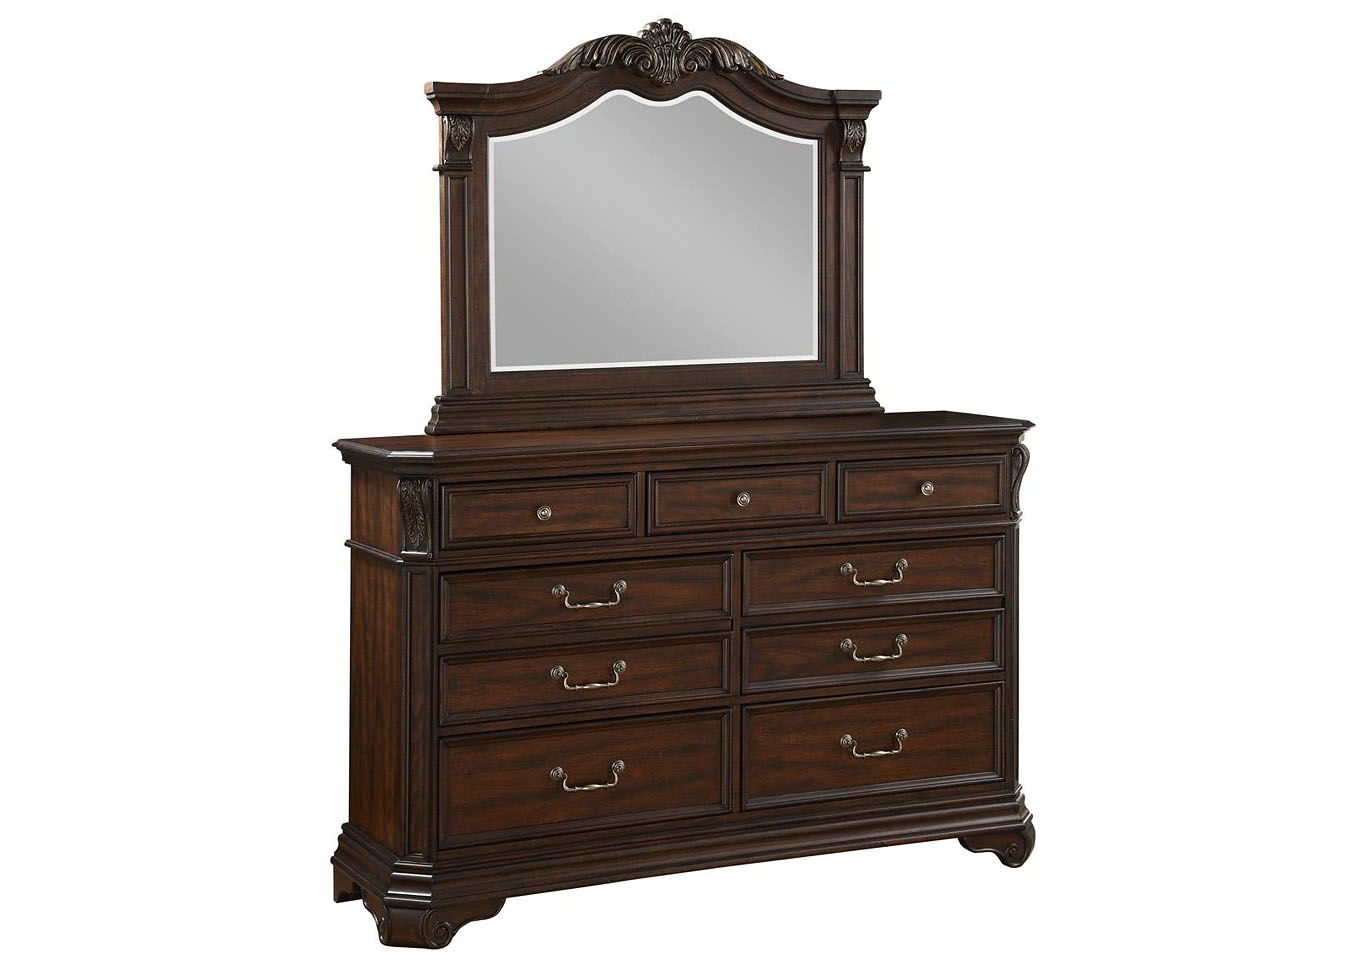 Andrea 4pc Traditional Storage Bedroom Group - Queen,Instore